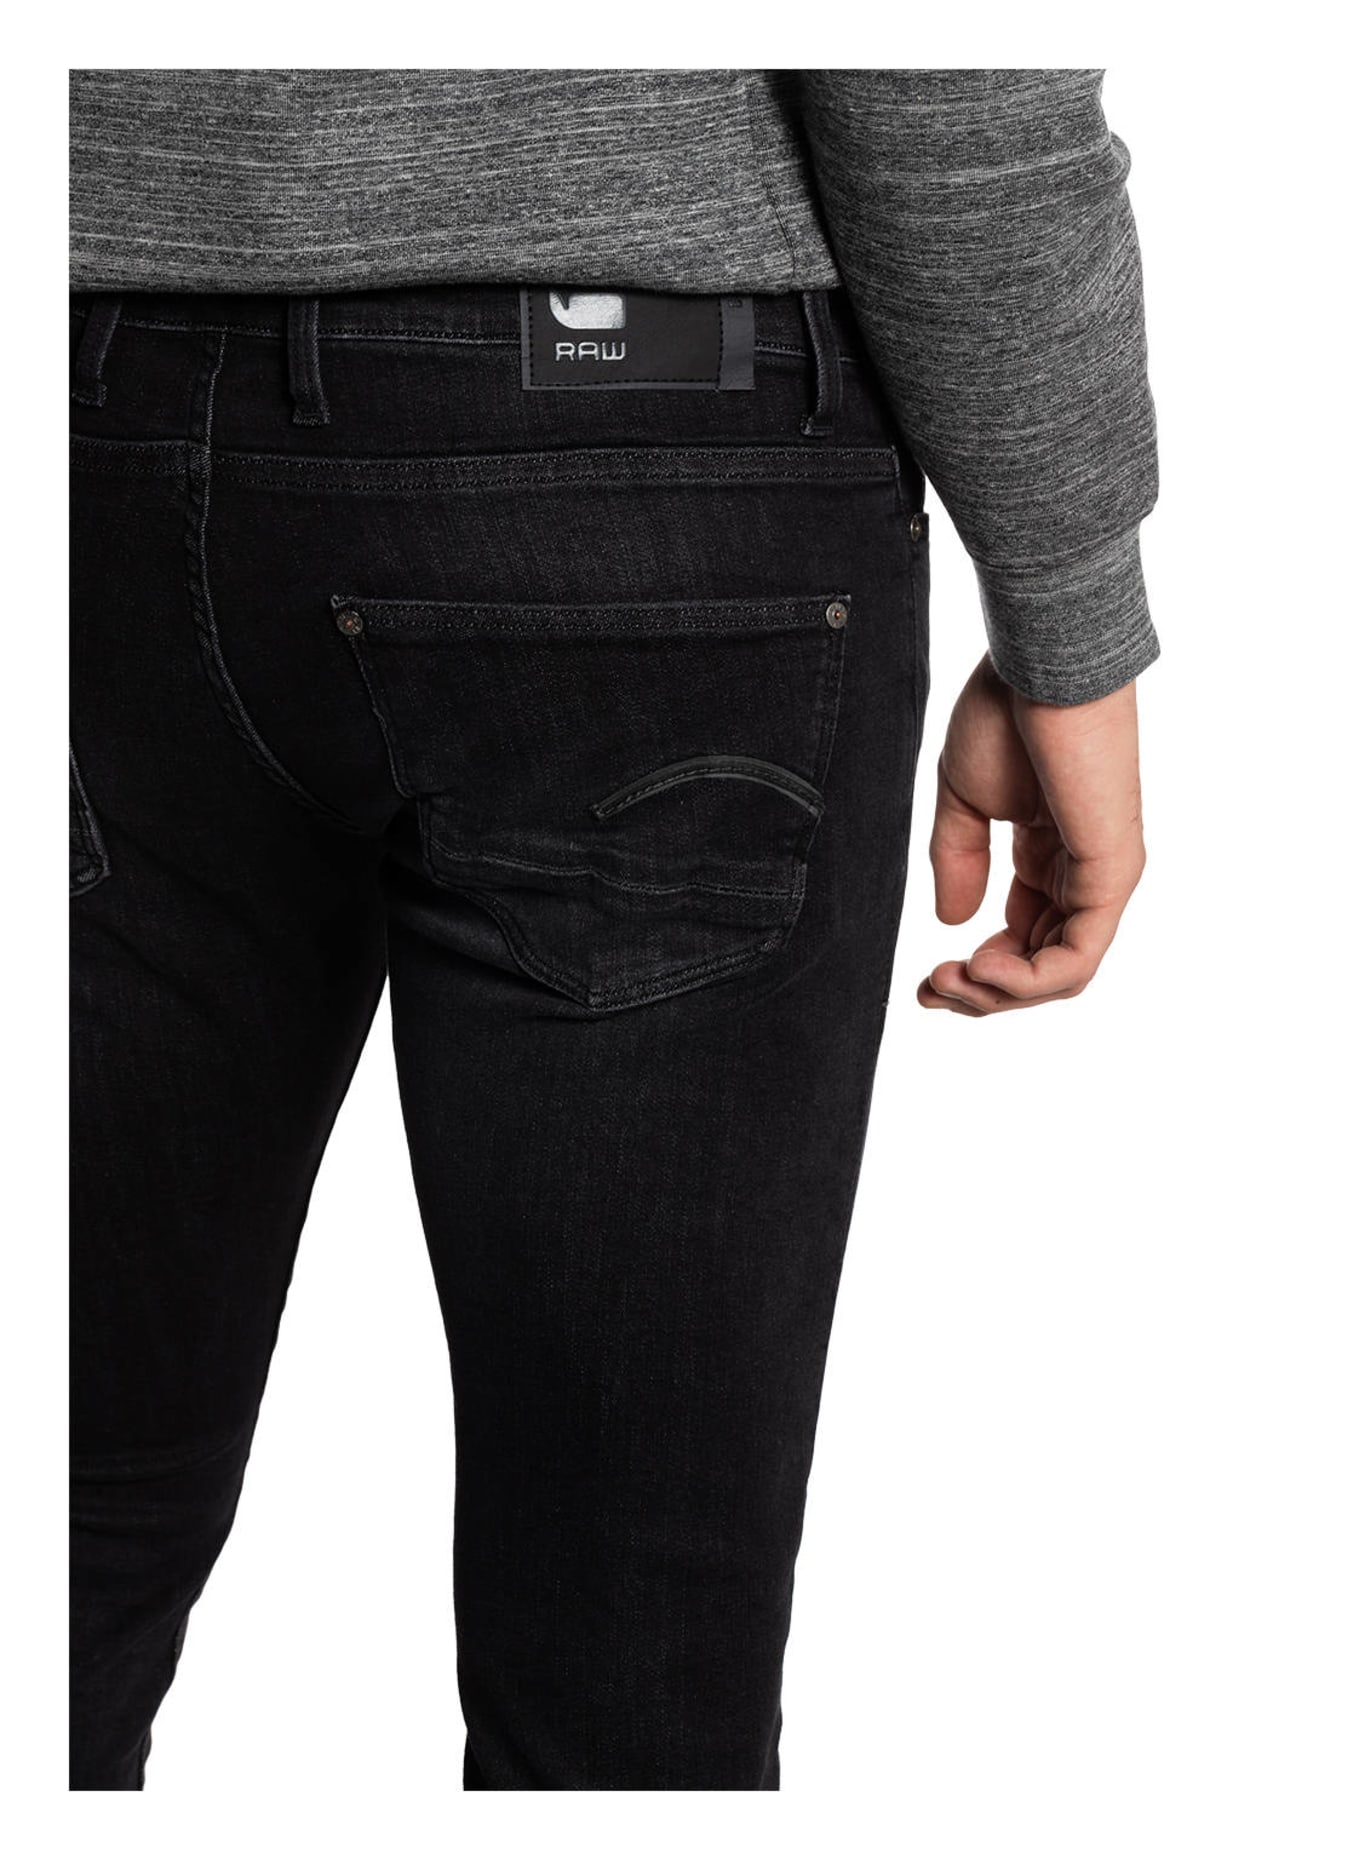 G-Star RAW Jeans REVEND skinny fit, Color: A592 medium aged faded (Image 5)